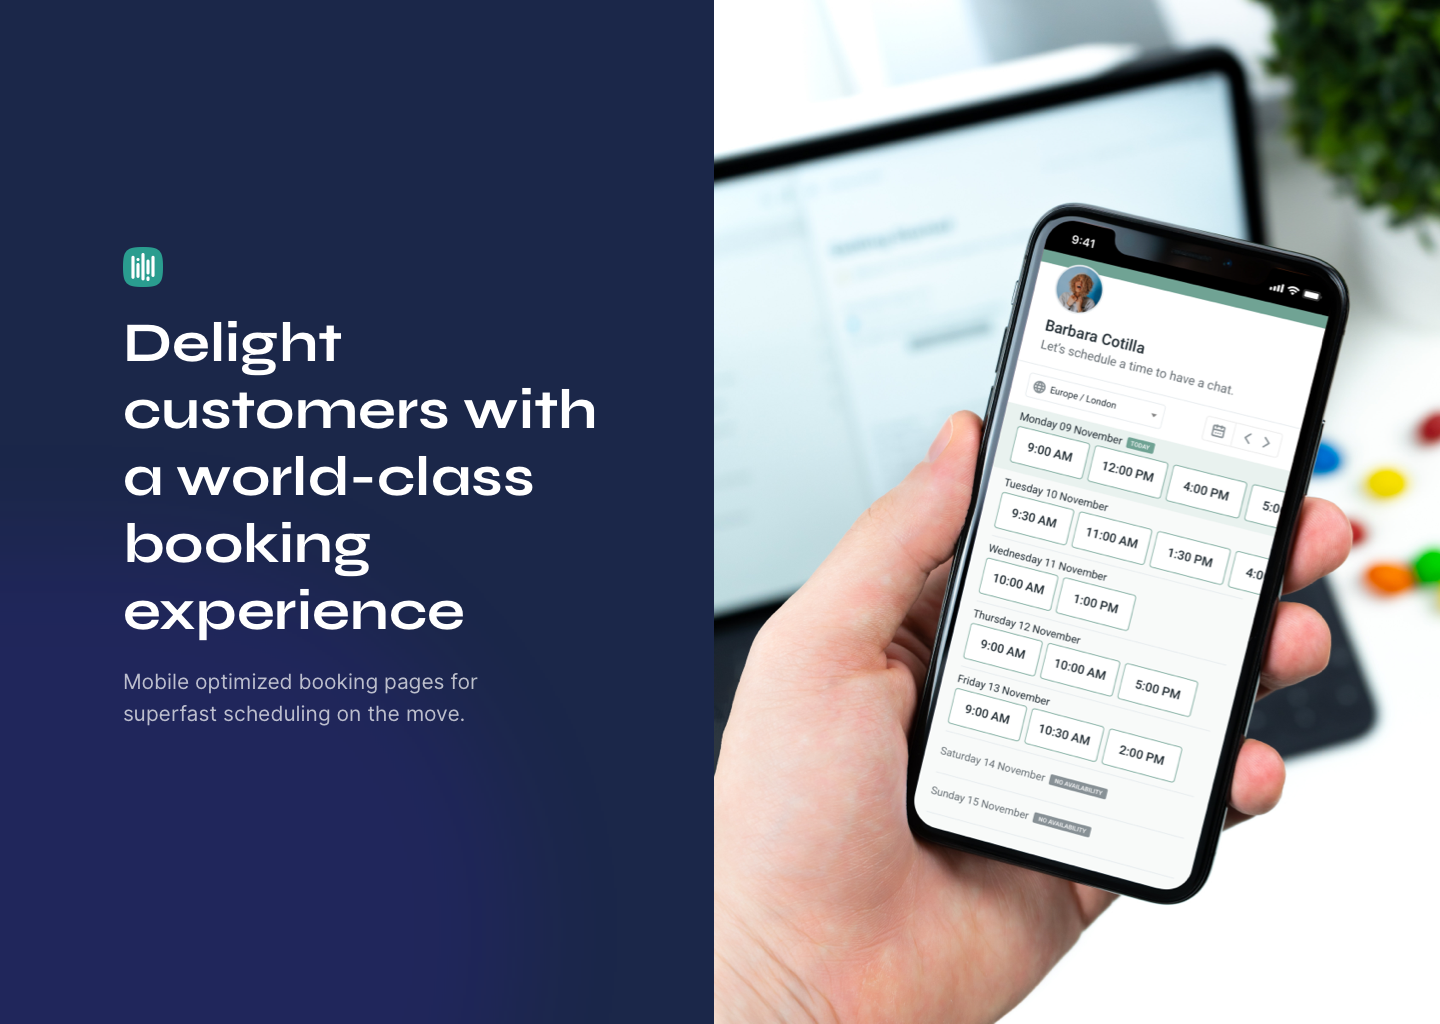 Delight customers with the best booking experience